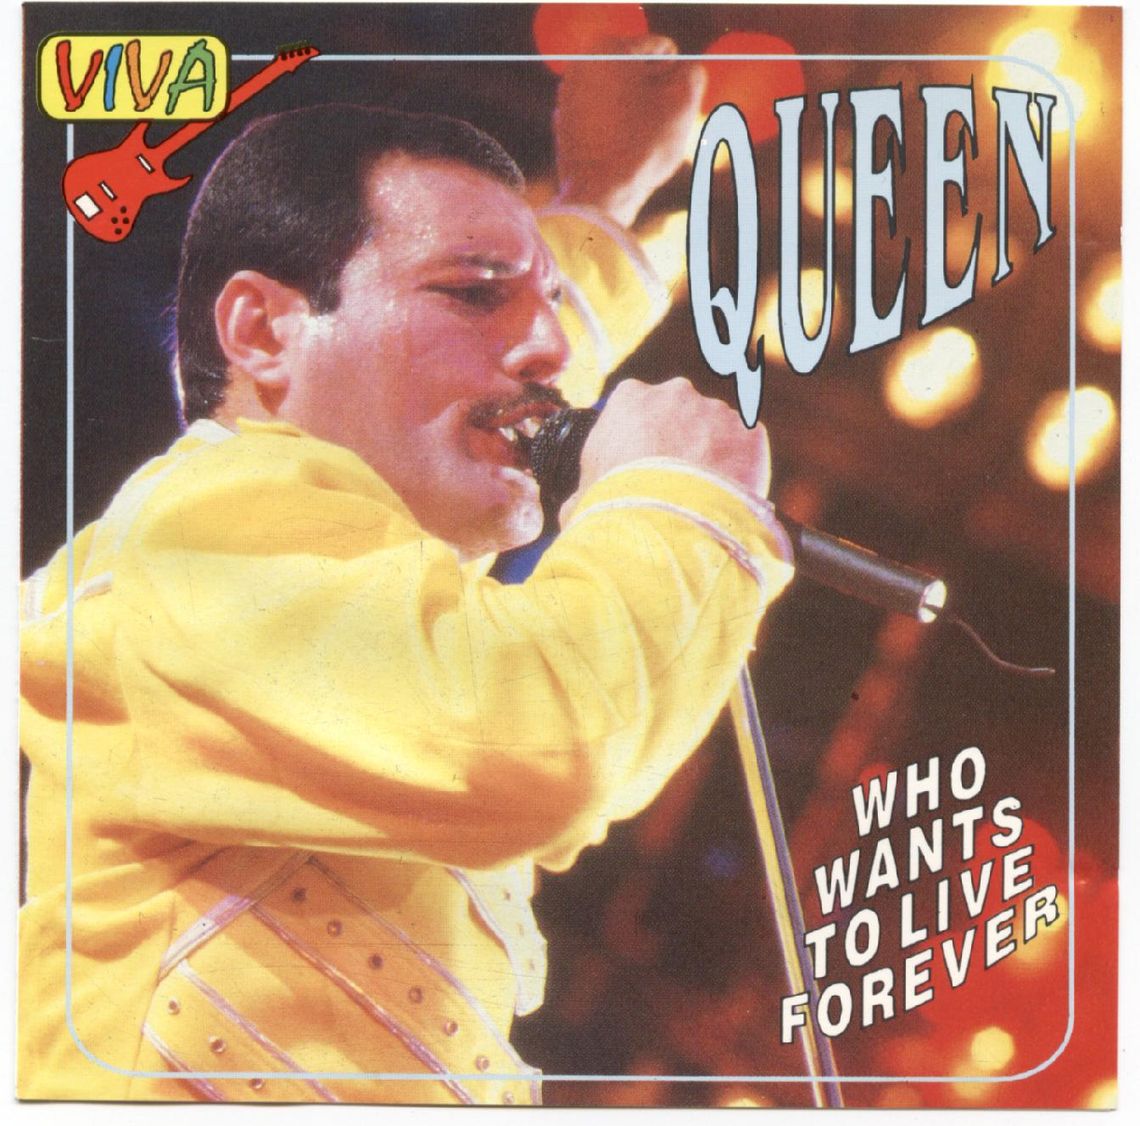 QUEEN - WHO WANTS TO LIVE FOREVER